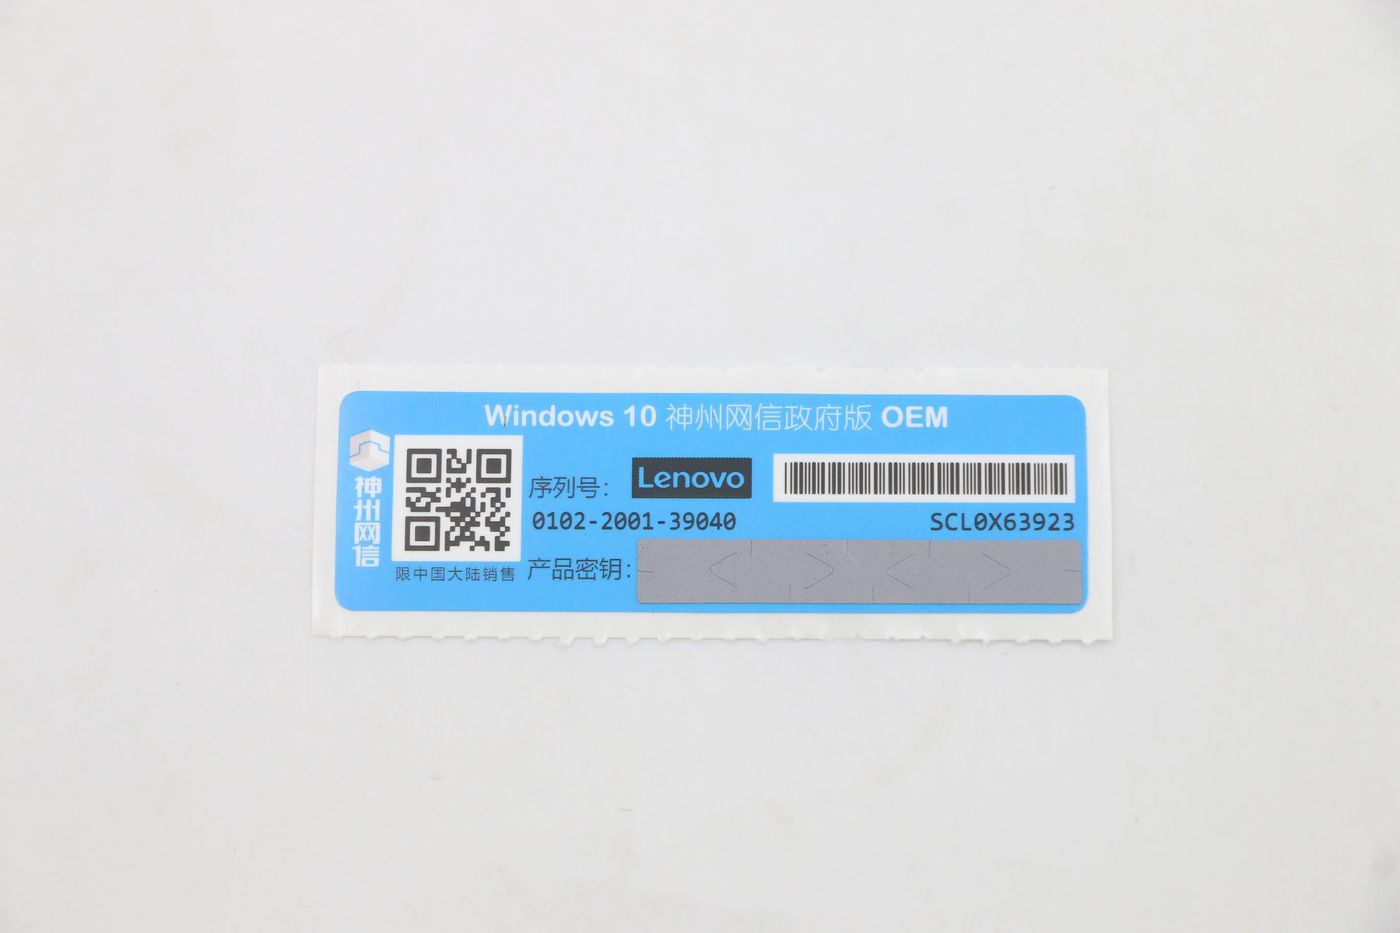 Lenovo 5CL1C42278 W125952164 FRU CMIT PN: This is the 